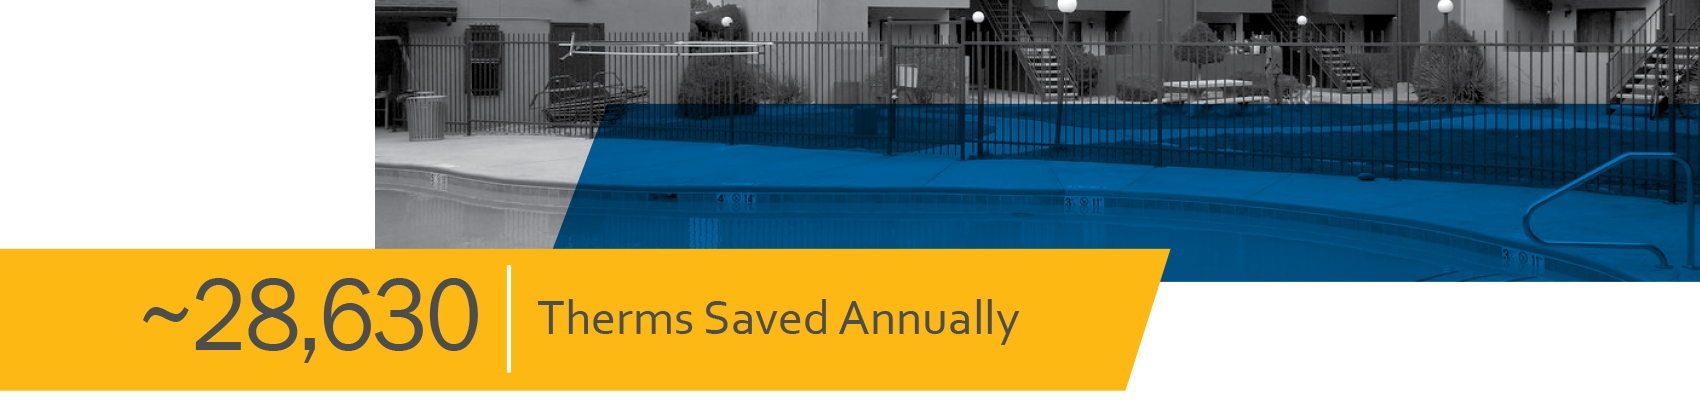 28,630 Therms Saved Annually